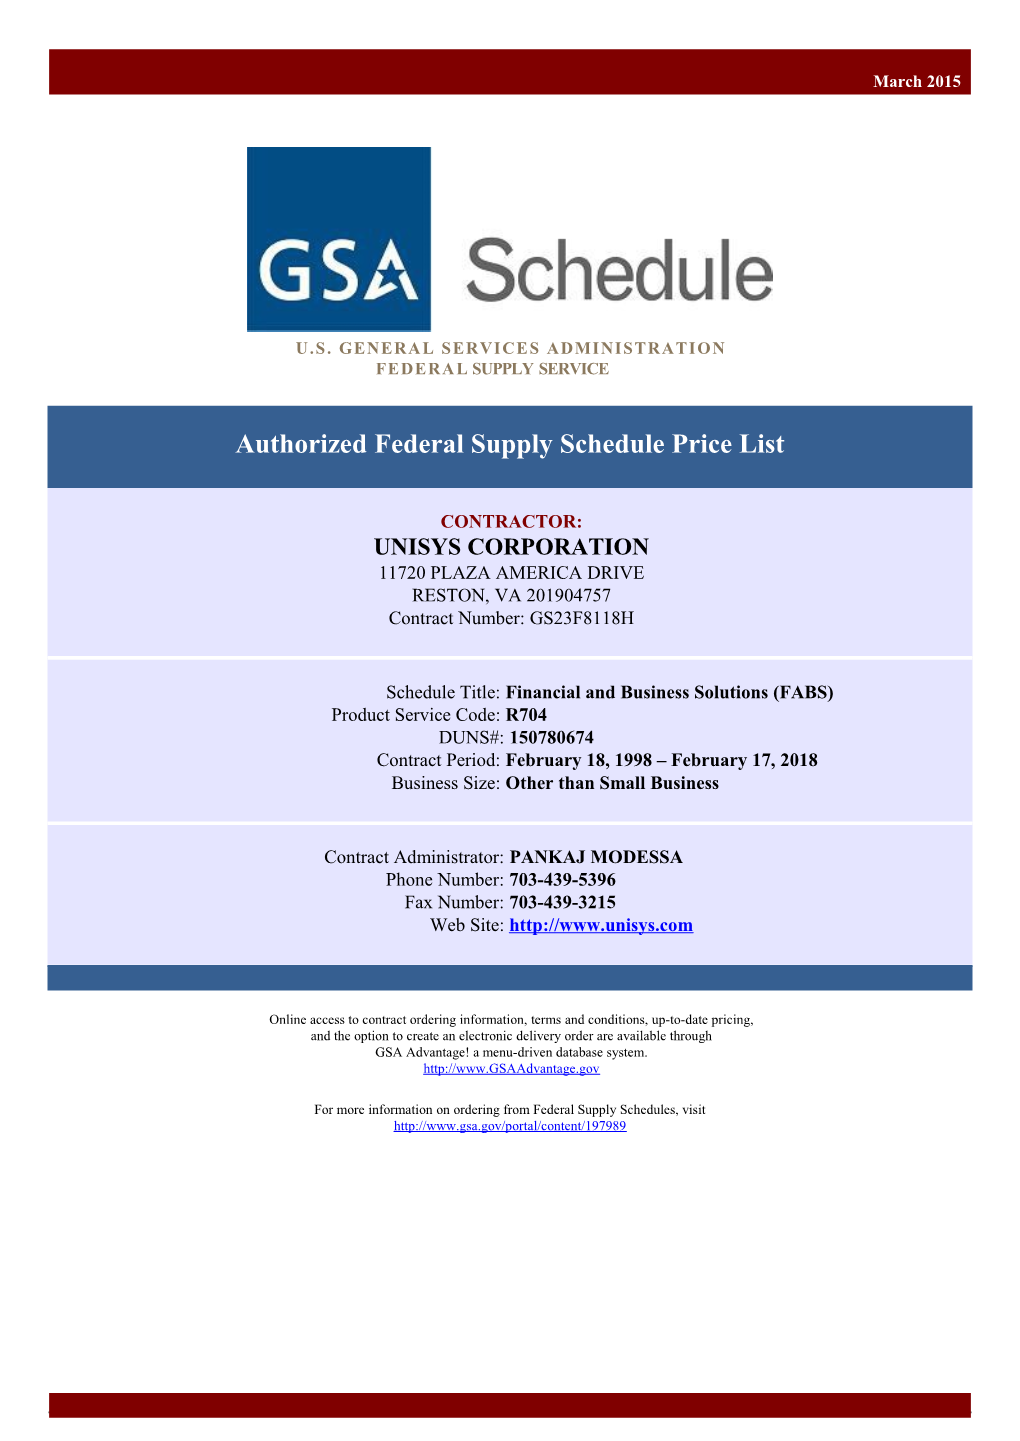 Authorized Federal Supply Schedule Price List s16